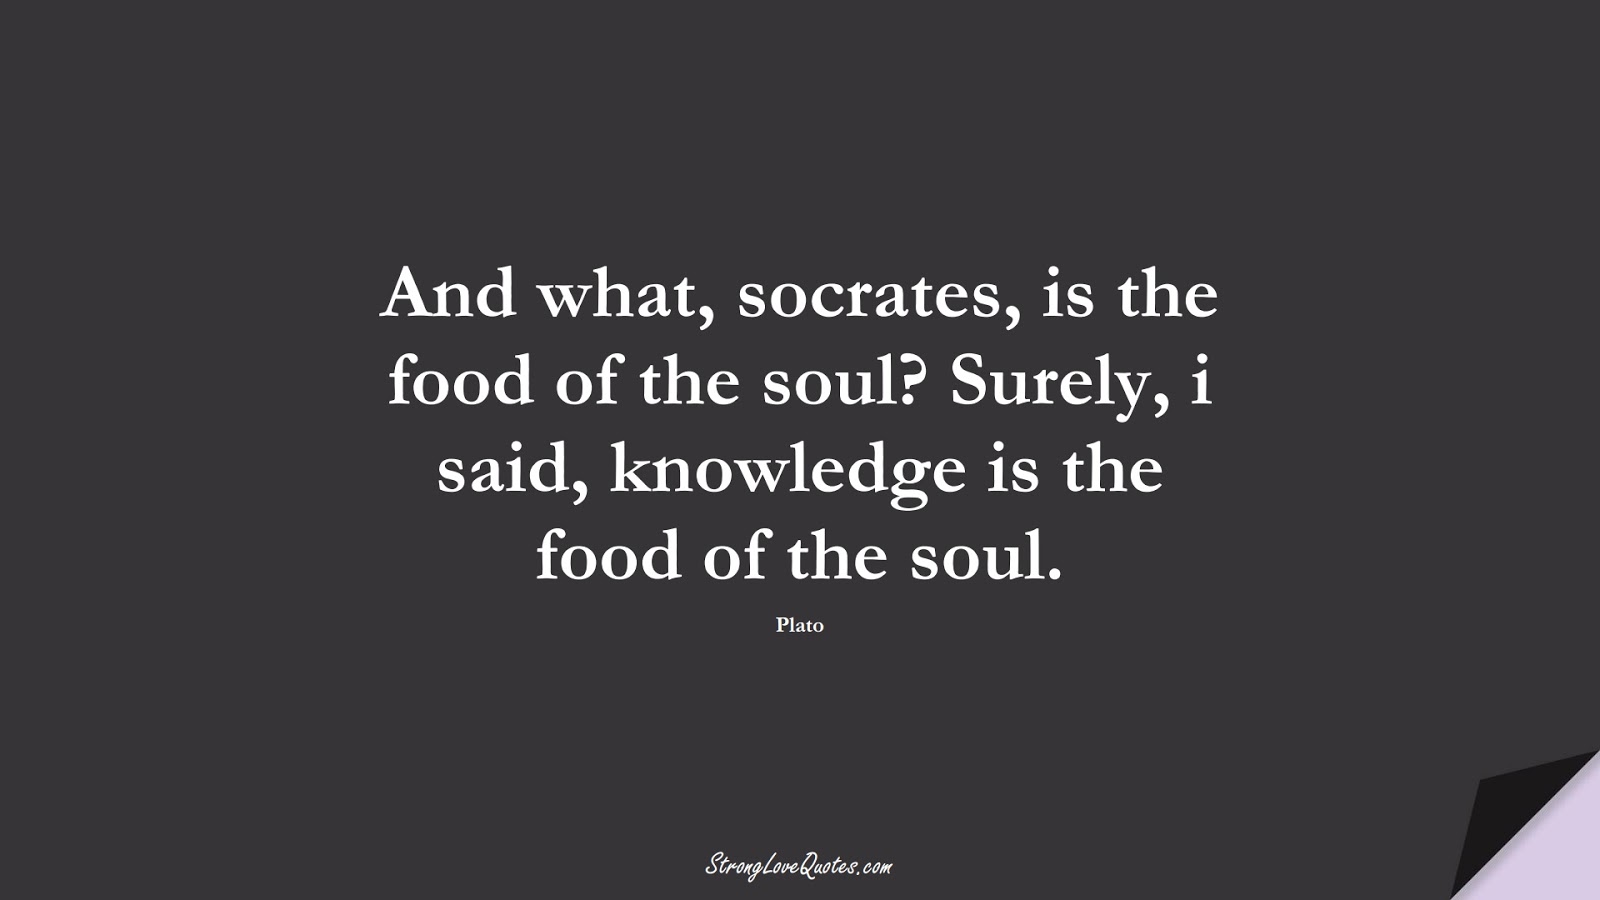 And what, socrates, is the food of the soul? Surely, i said, knowledge is the food of the soul. (Plato);  #KnowledgeQuotes